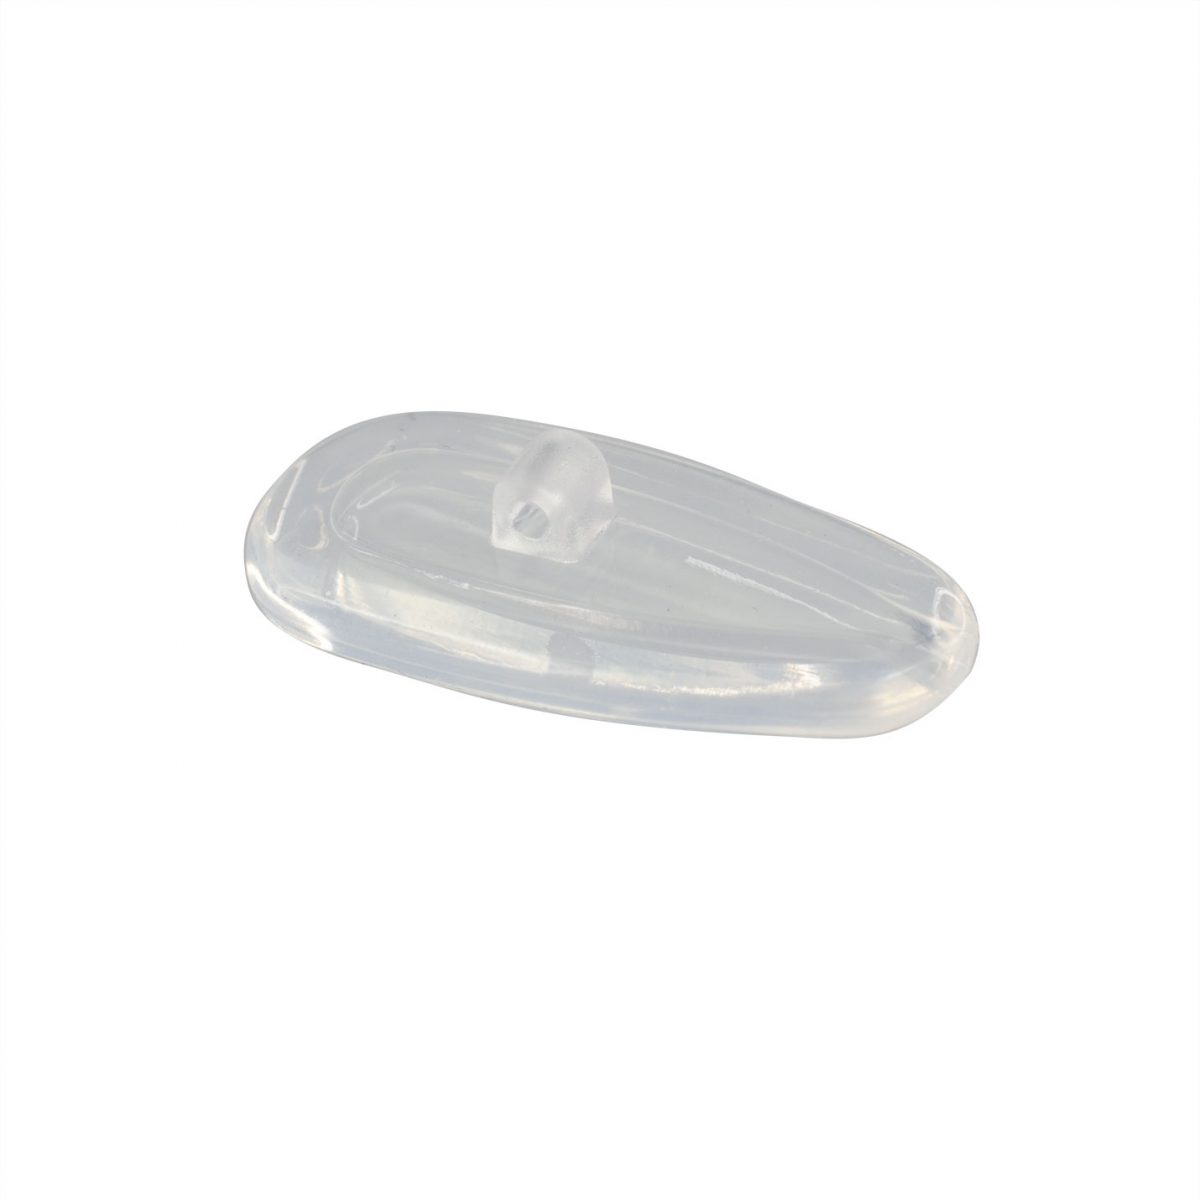 Air Active Screw-On Silicone Nose Pads